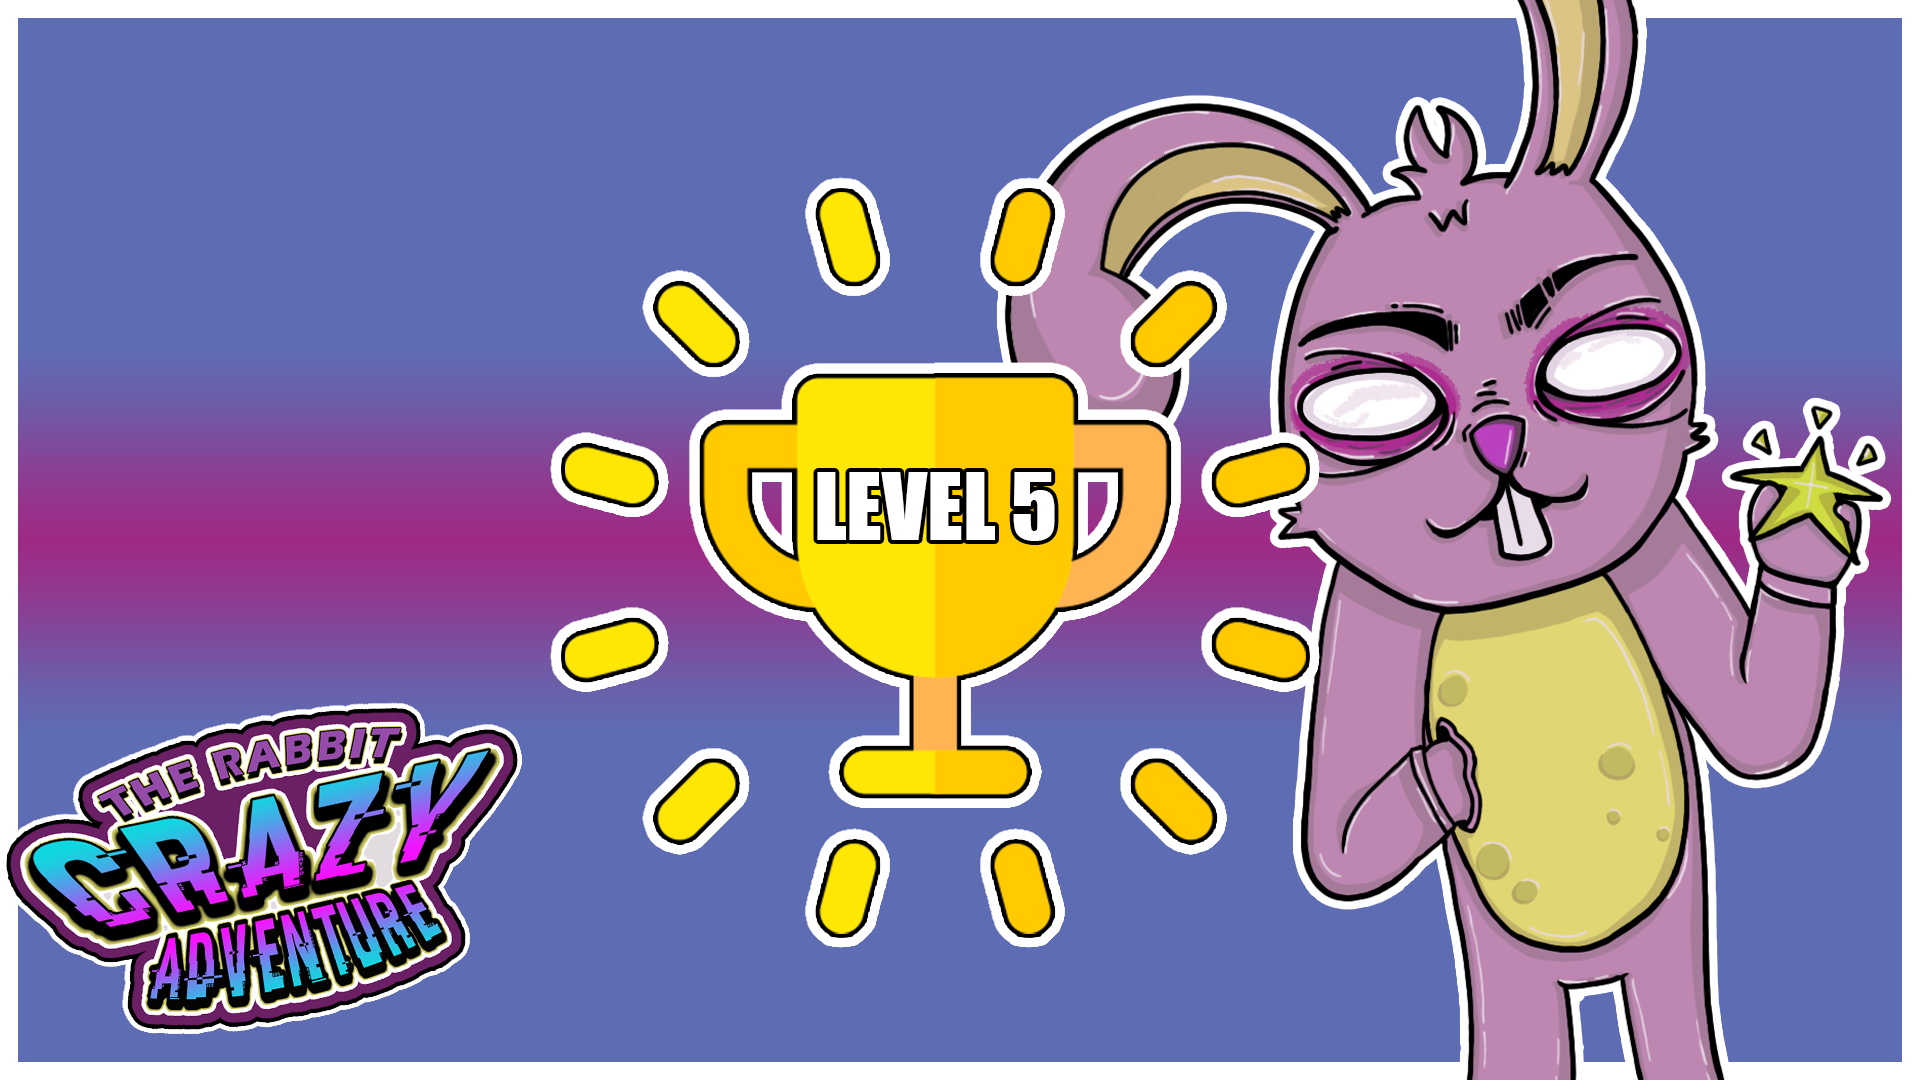 Icon for LEVEL 5